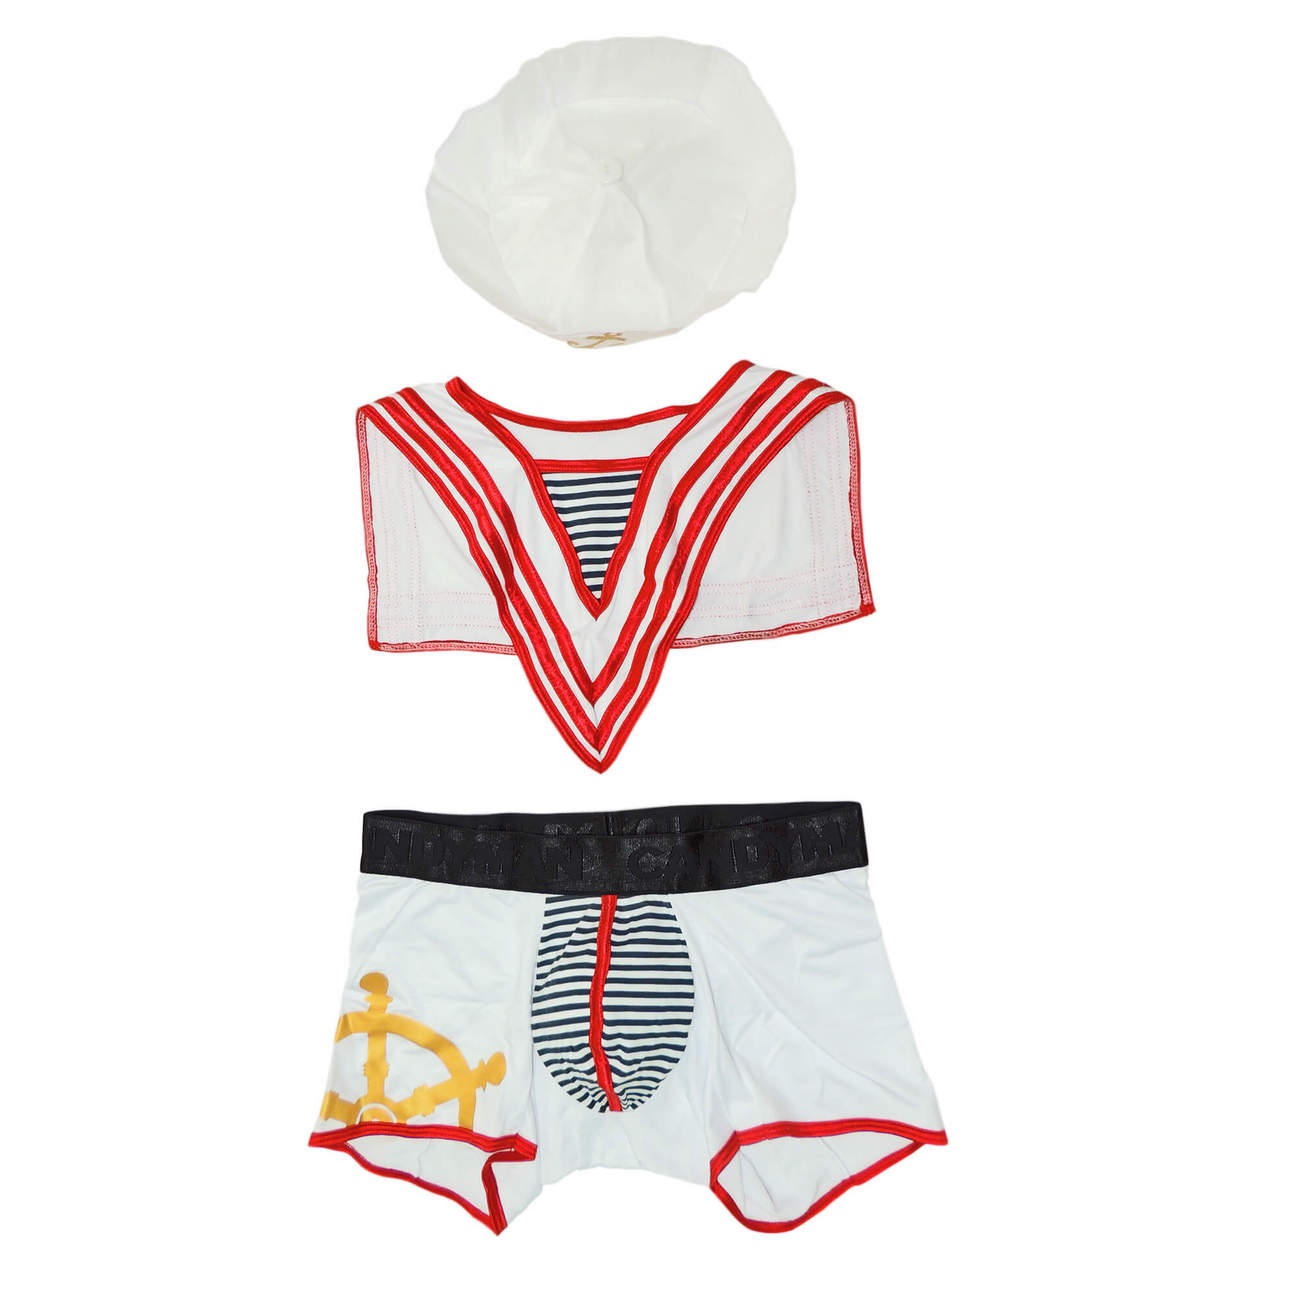 under-yours - Sailor Costume Outfit - CandyMan - Sexy Costumes